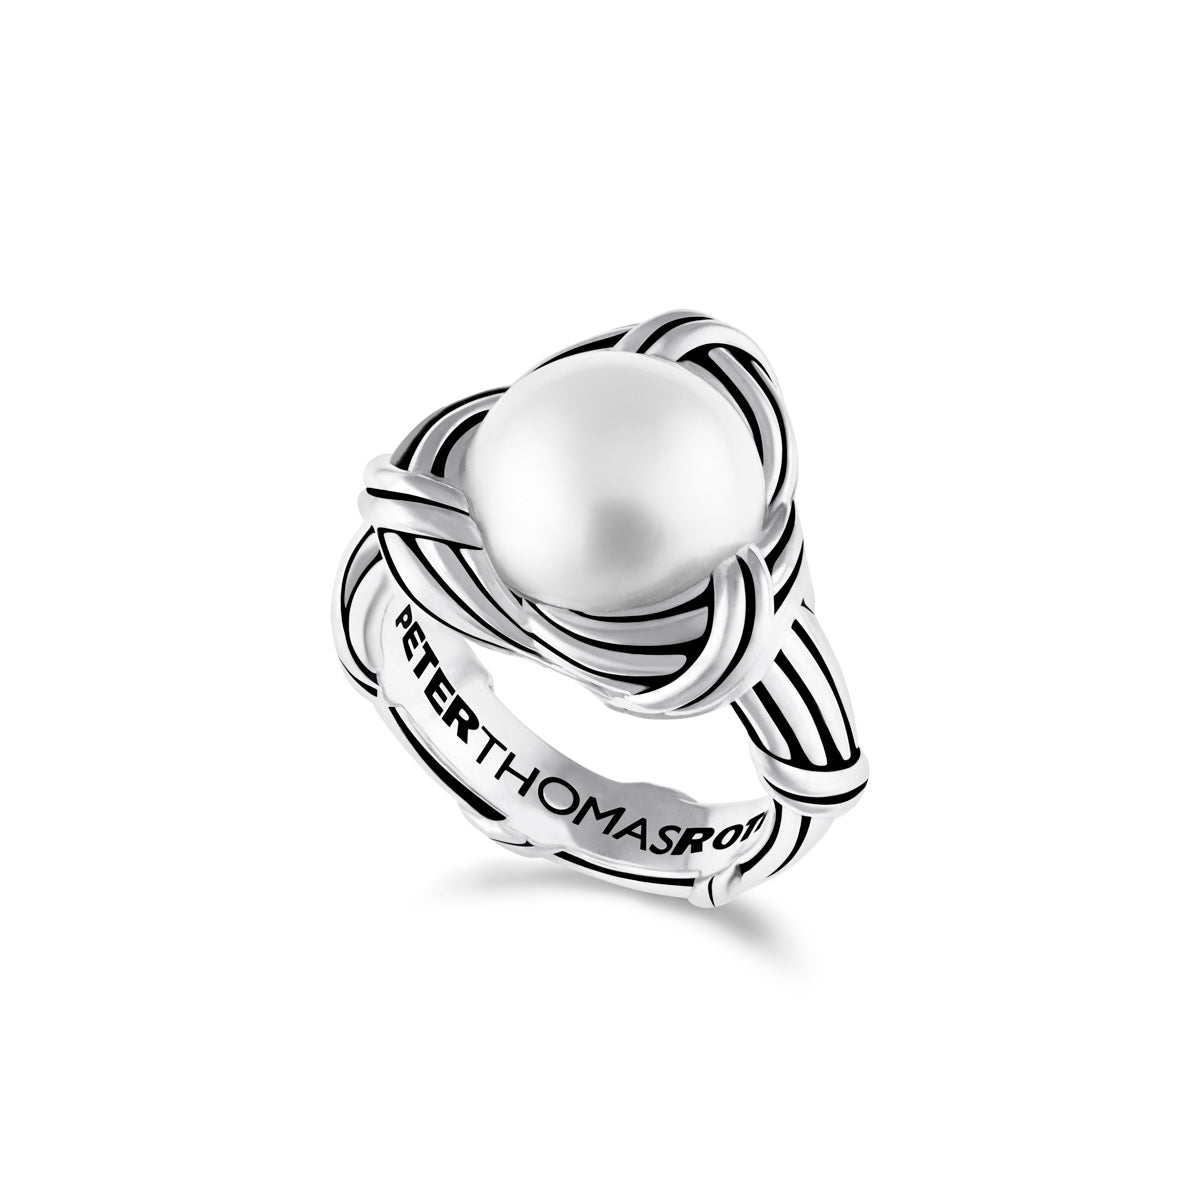 Park Love Knot Cocktail Ring in sterling silver with white pearl 12mm